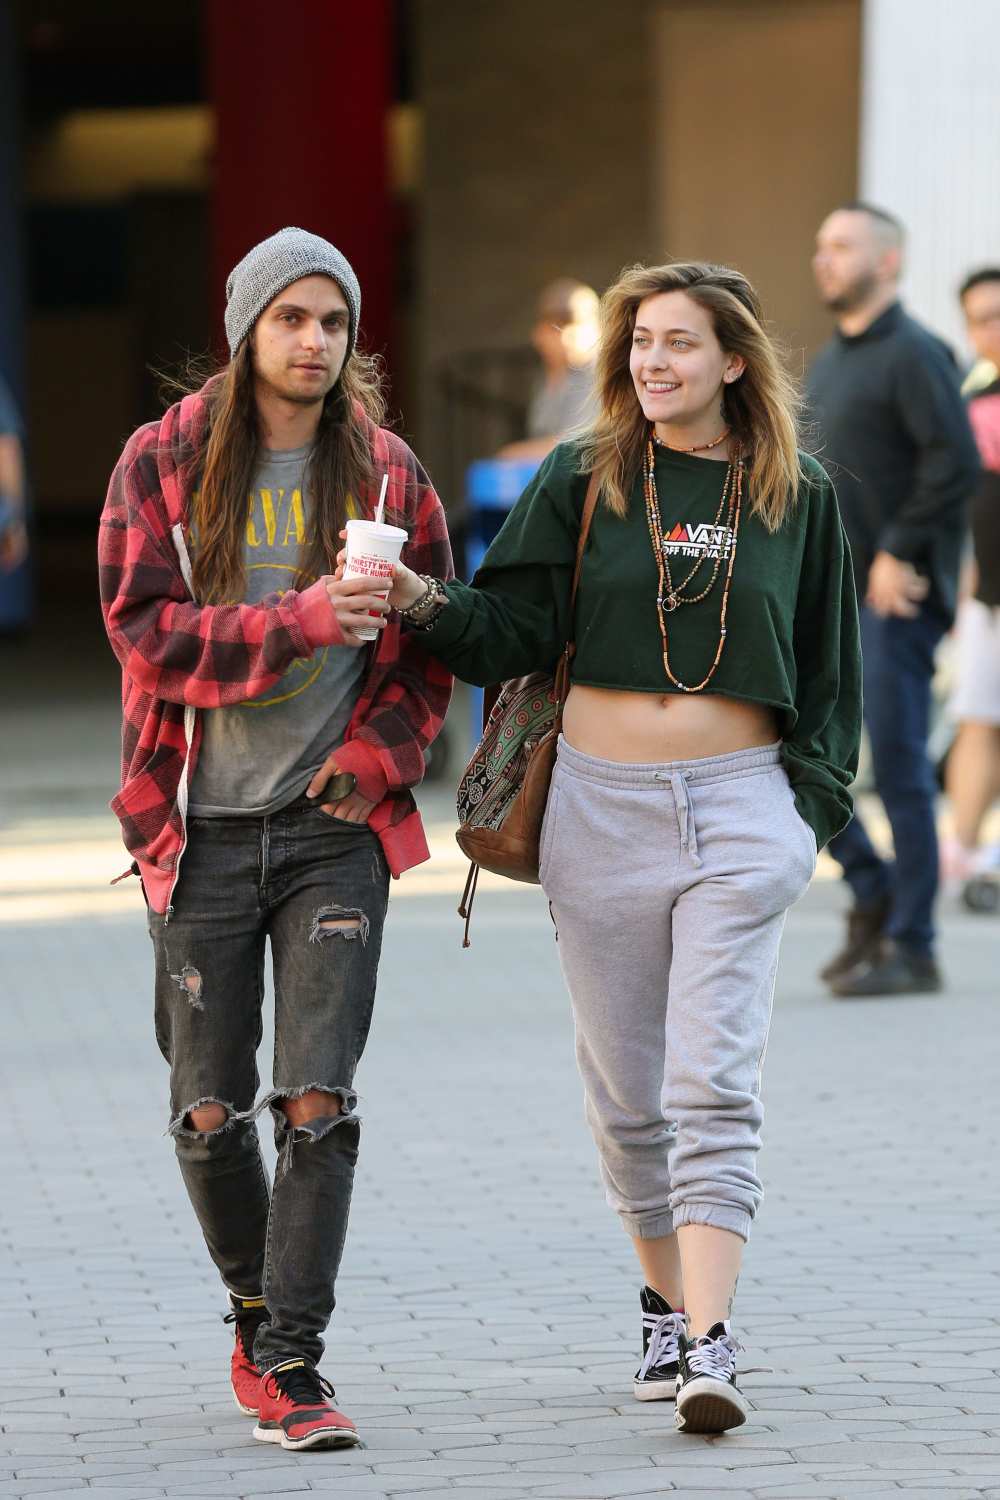 Paris Jackson Steps Out With BF Hours After Reported Hospitalization